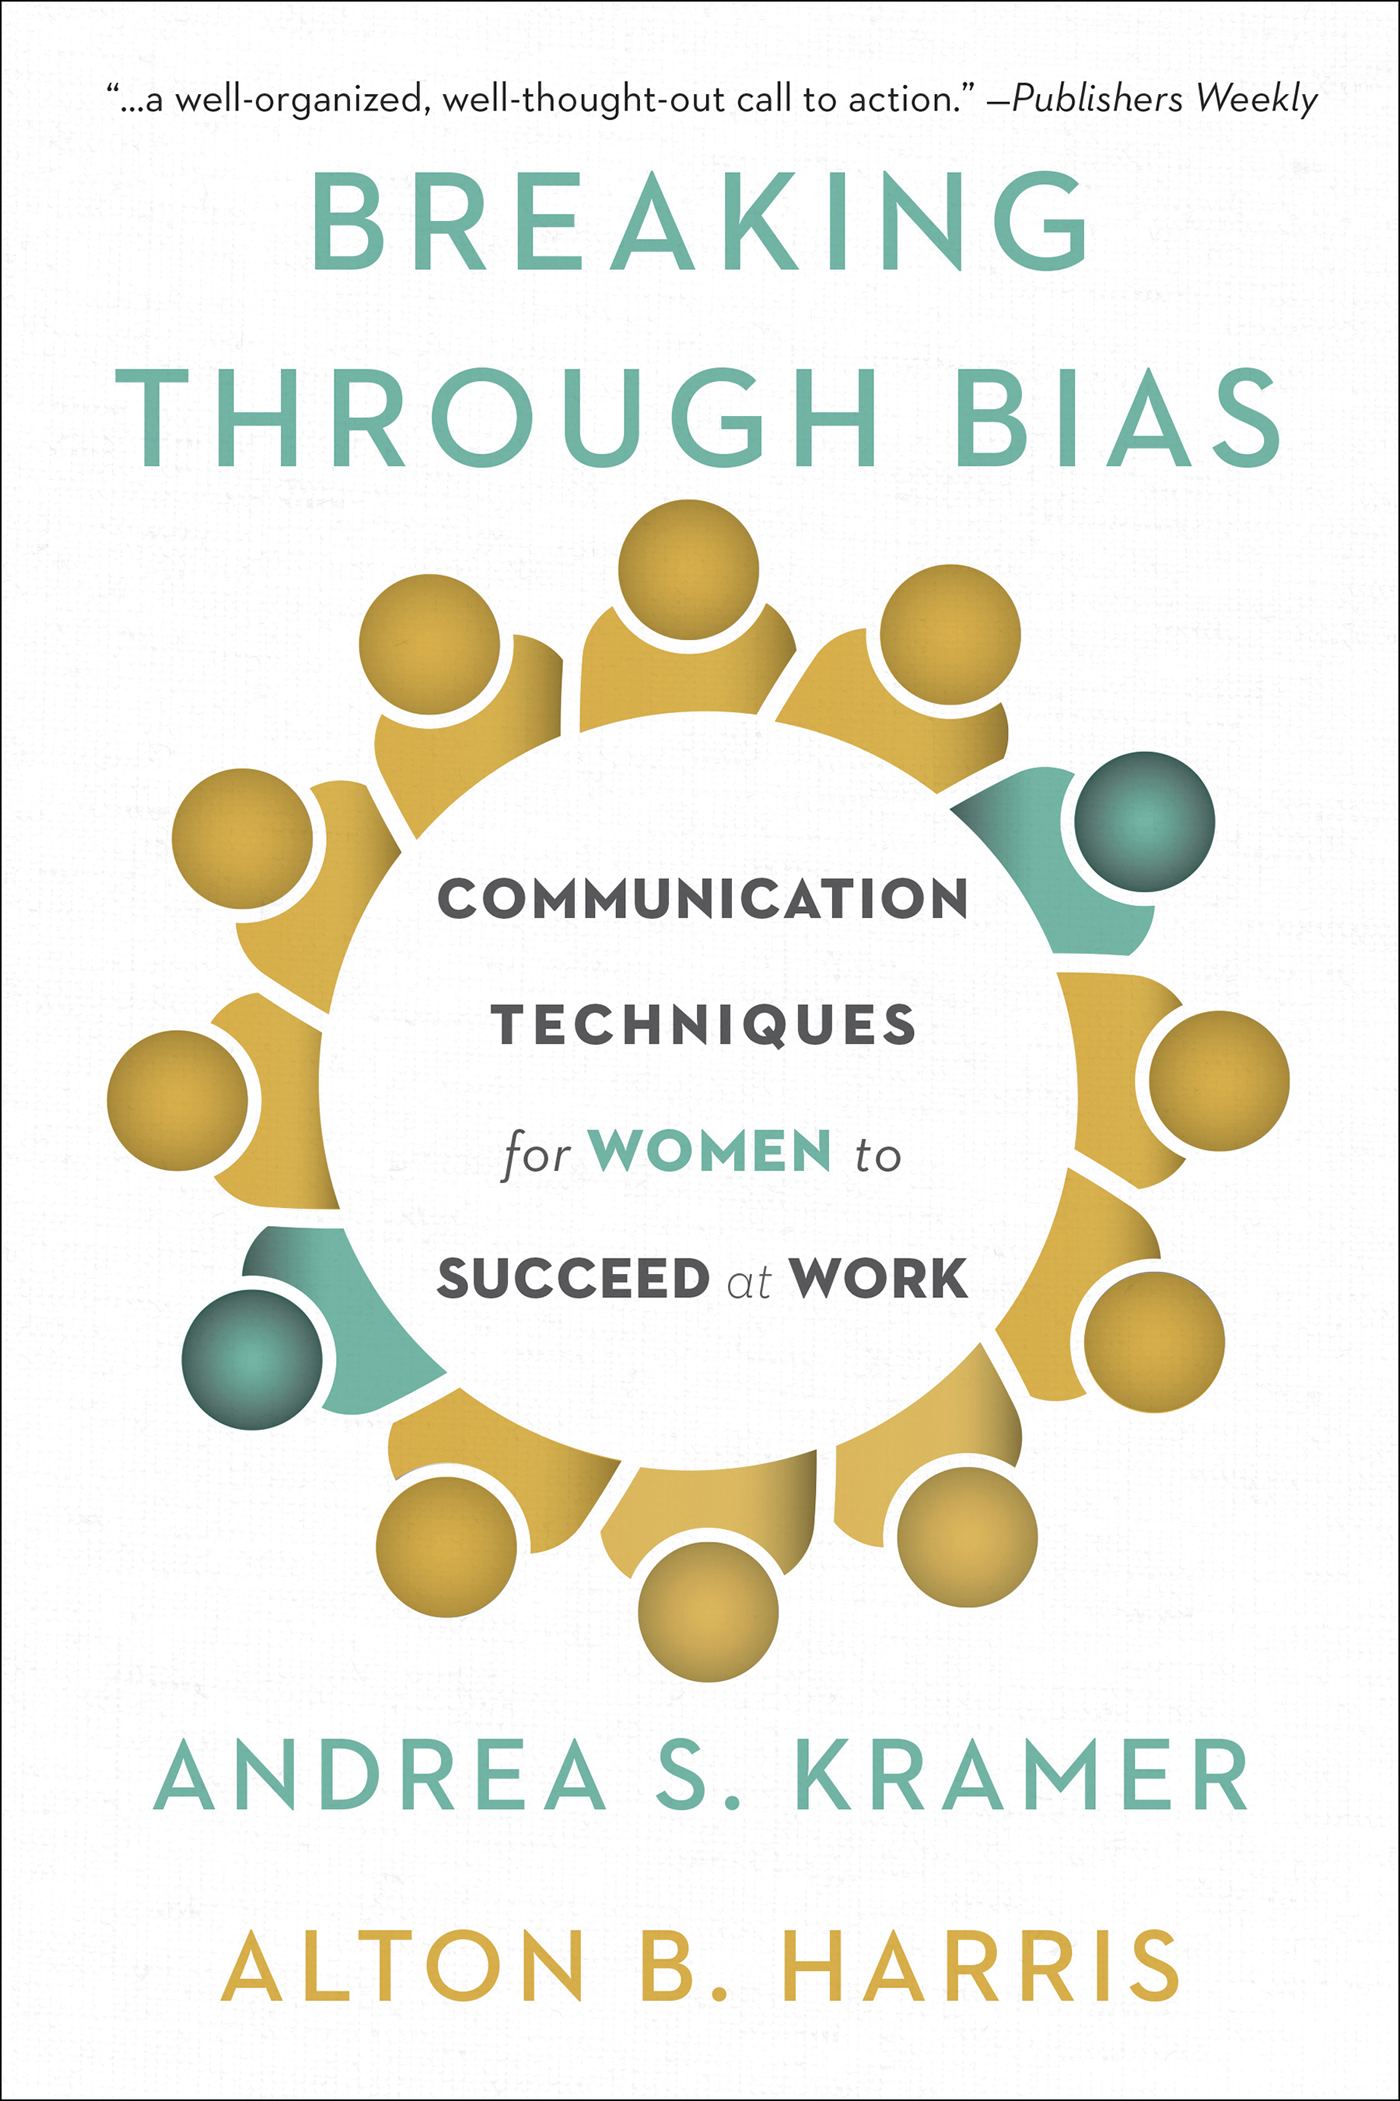 This image is the cover for the book Breaking Through Bias: Communication Techniques for Women to Succeed at Work